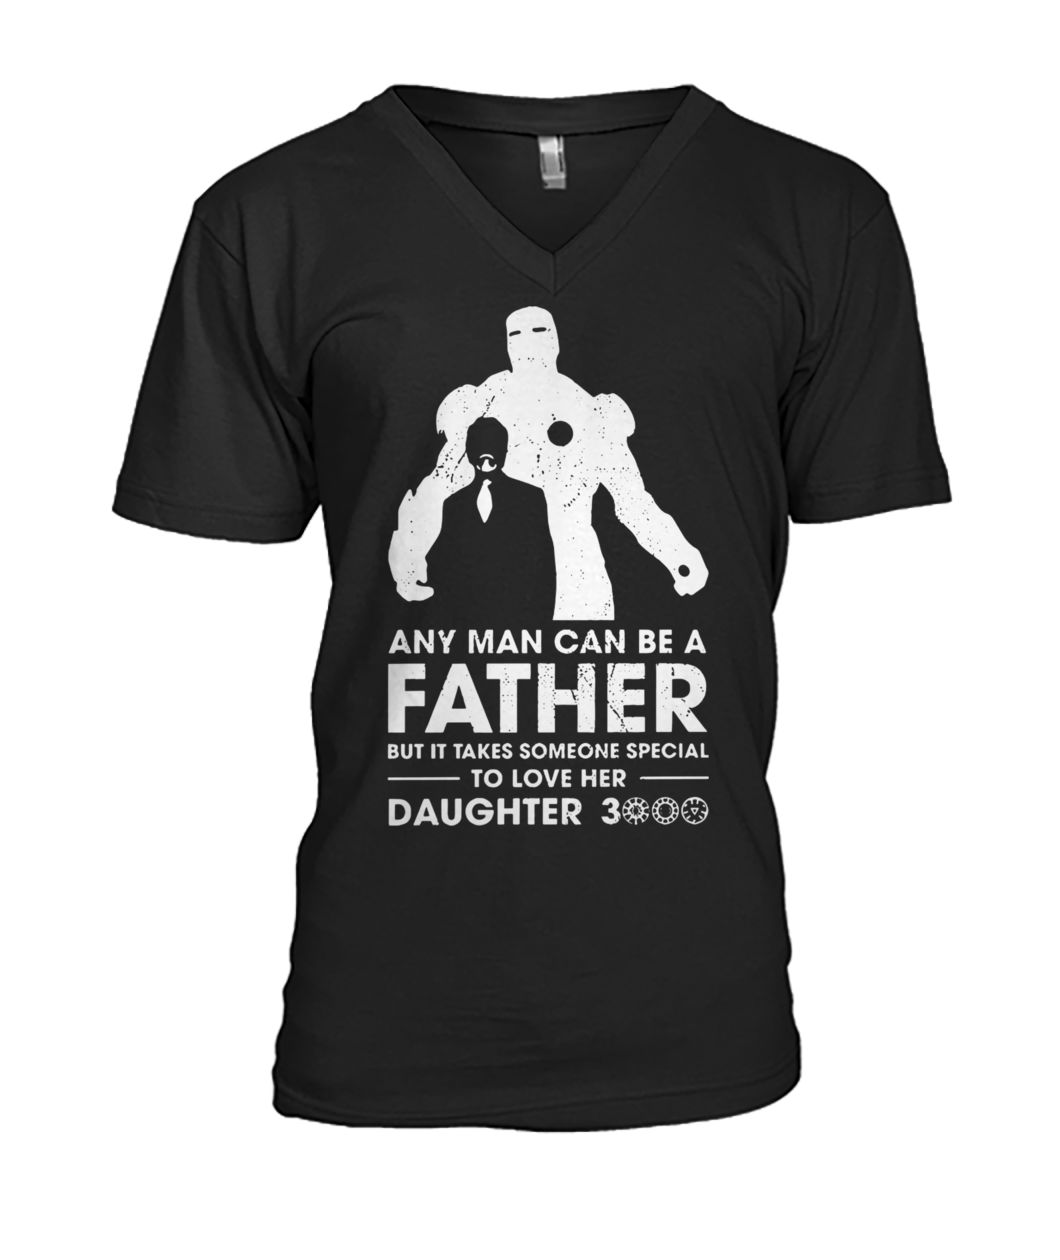 Iron man any man can be a father but it takes someone special to love her daughter 3000 mens v-neck